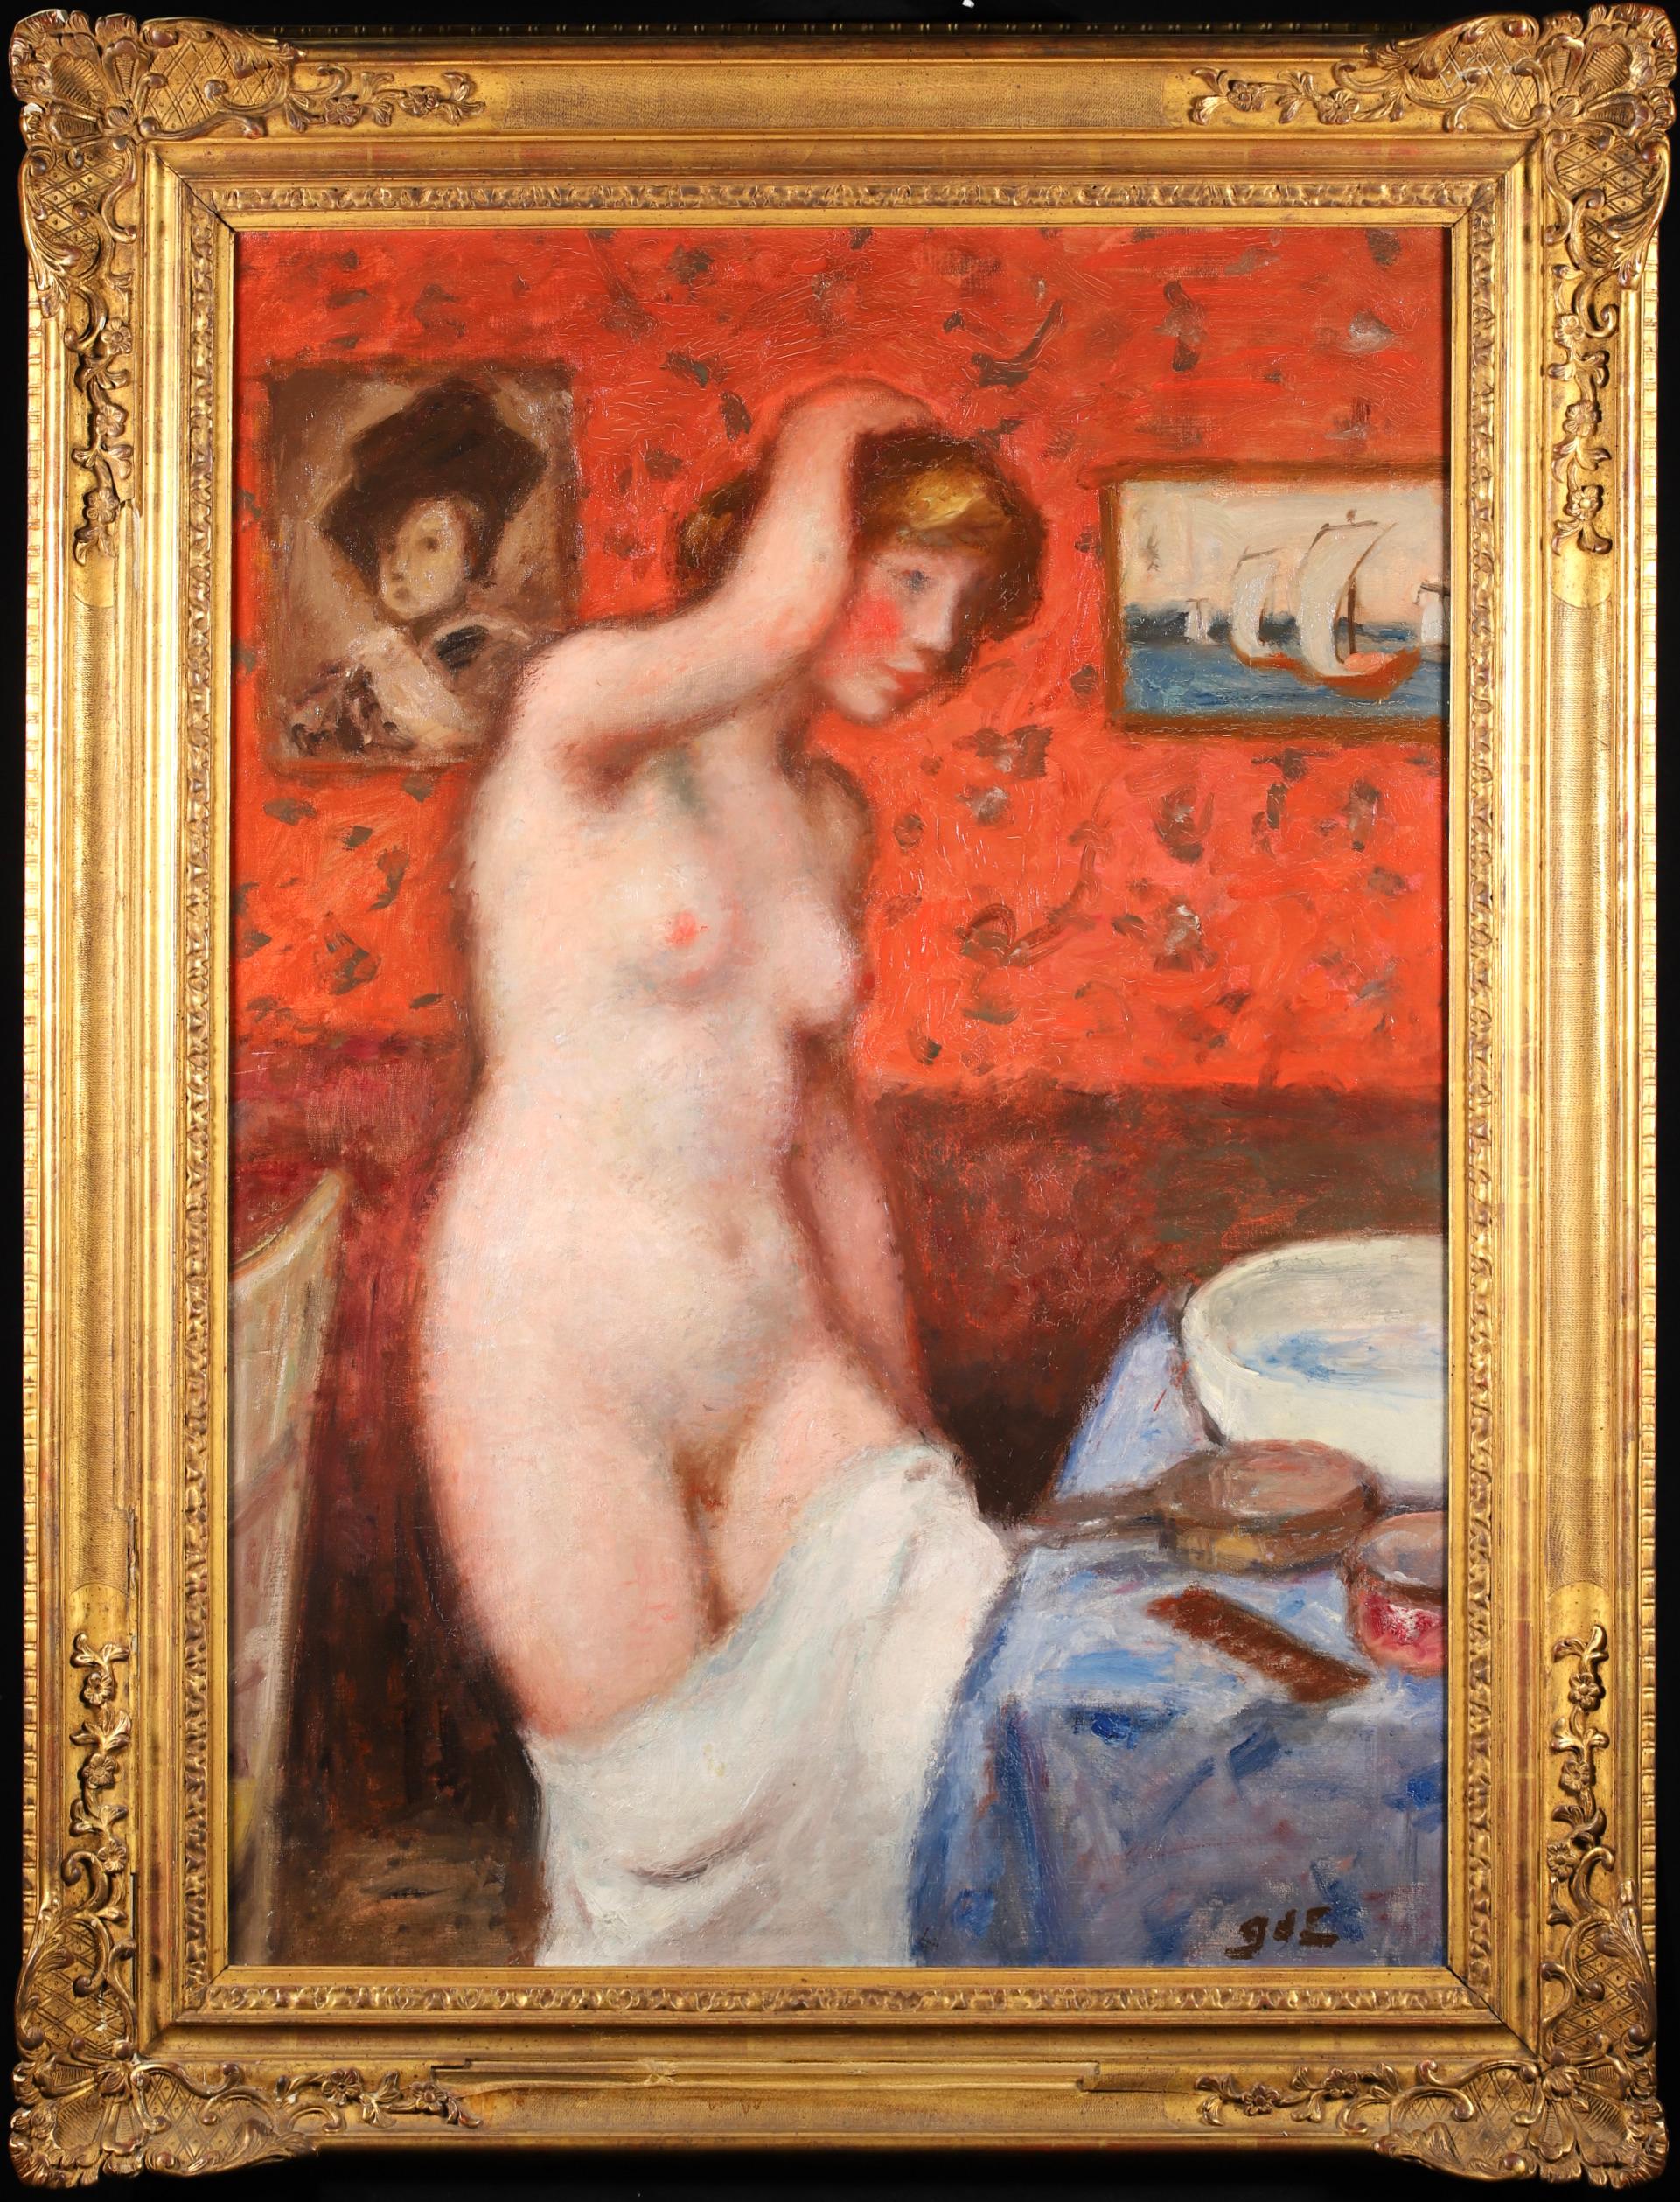 Signed oil on original canvas nude circa 1914 by French post impressionist painter Georges D'espagnat. The work depict a nude woman standing beside a wash basin in a boudoir. 

Signature:
Signed lower right

Dimensions:
Framed: 45"x34"
Unframed: